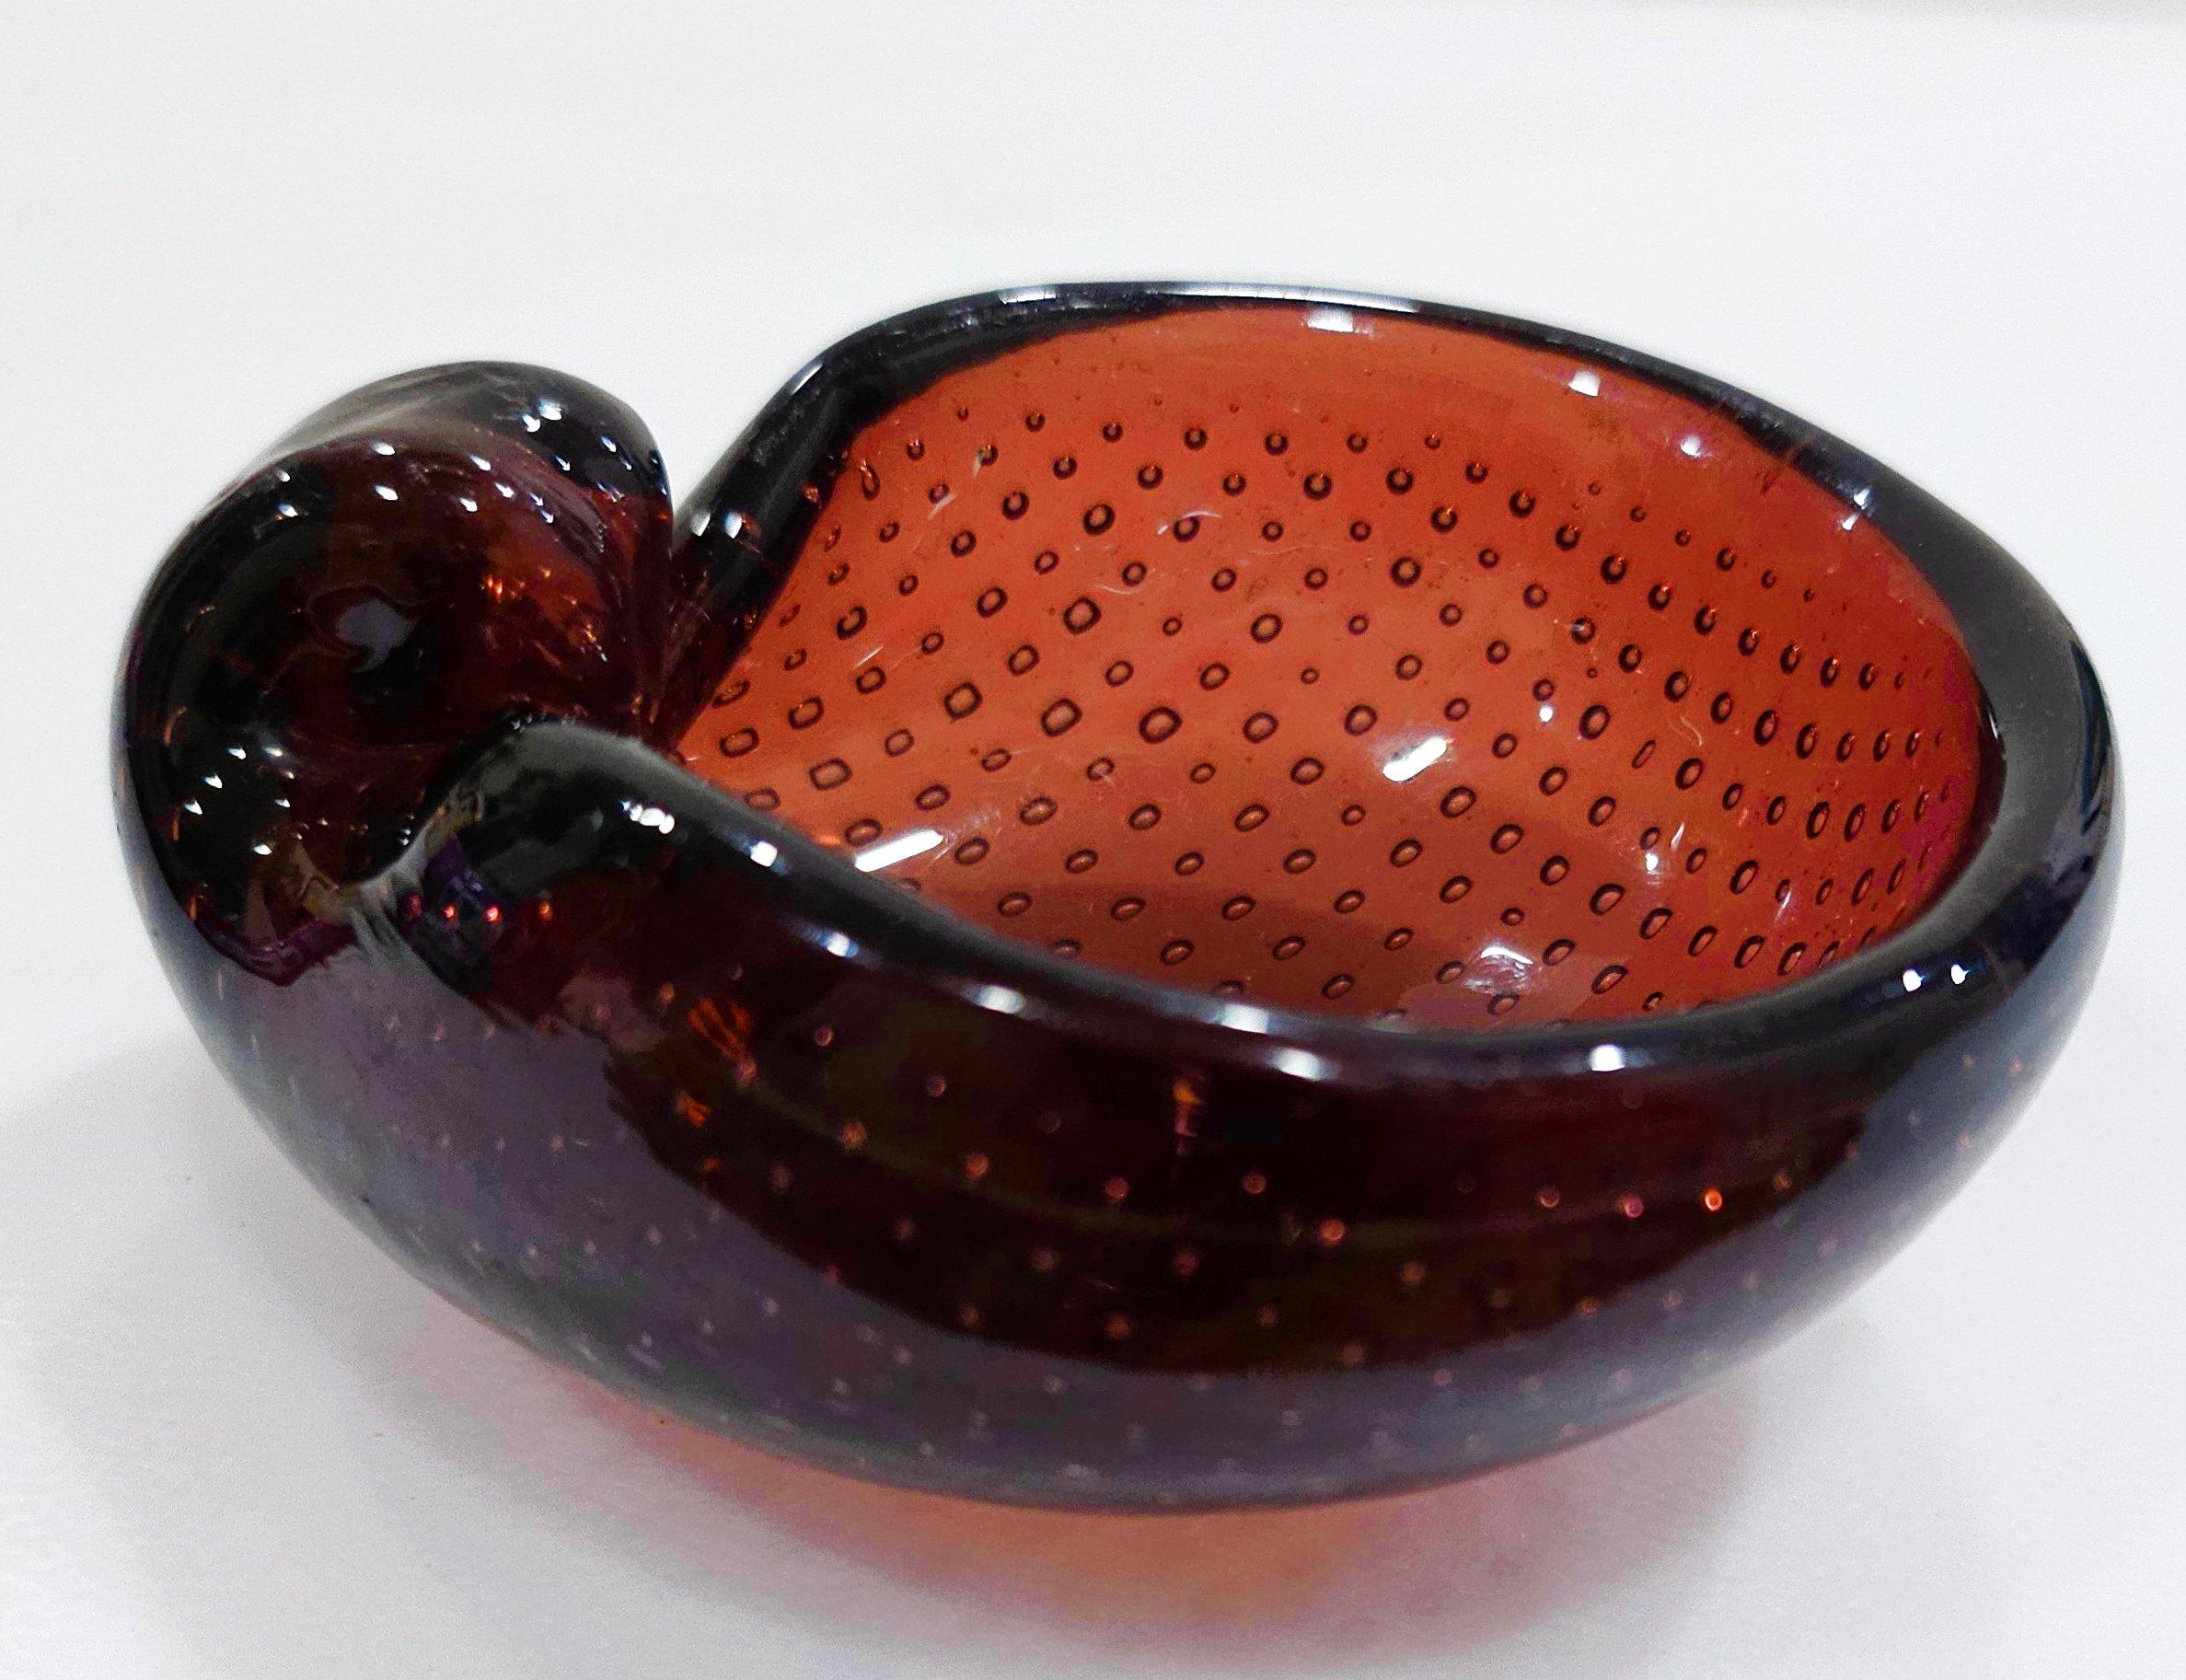 Vintage Murano Glass Bullicante Shell Bowl by Archimede Seguso
Very nice vintage condition! These are beloved for the precision (and shape) of the bubbles and controlled bubble pattern
No cracks or chips.
About 3.5